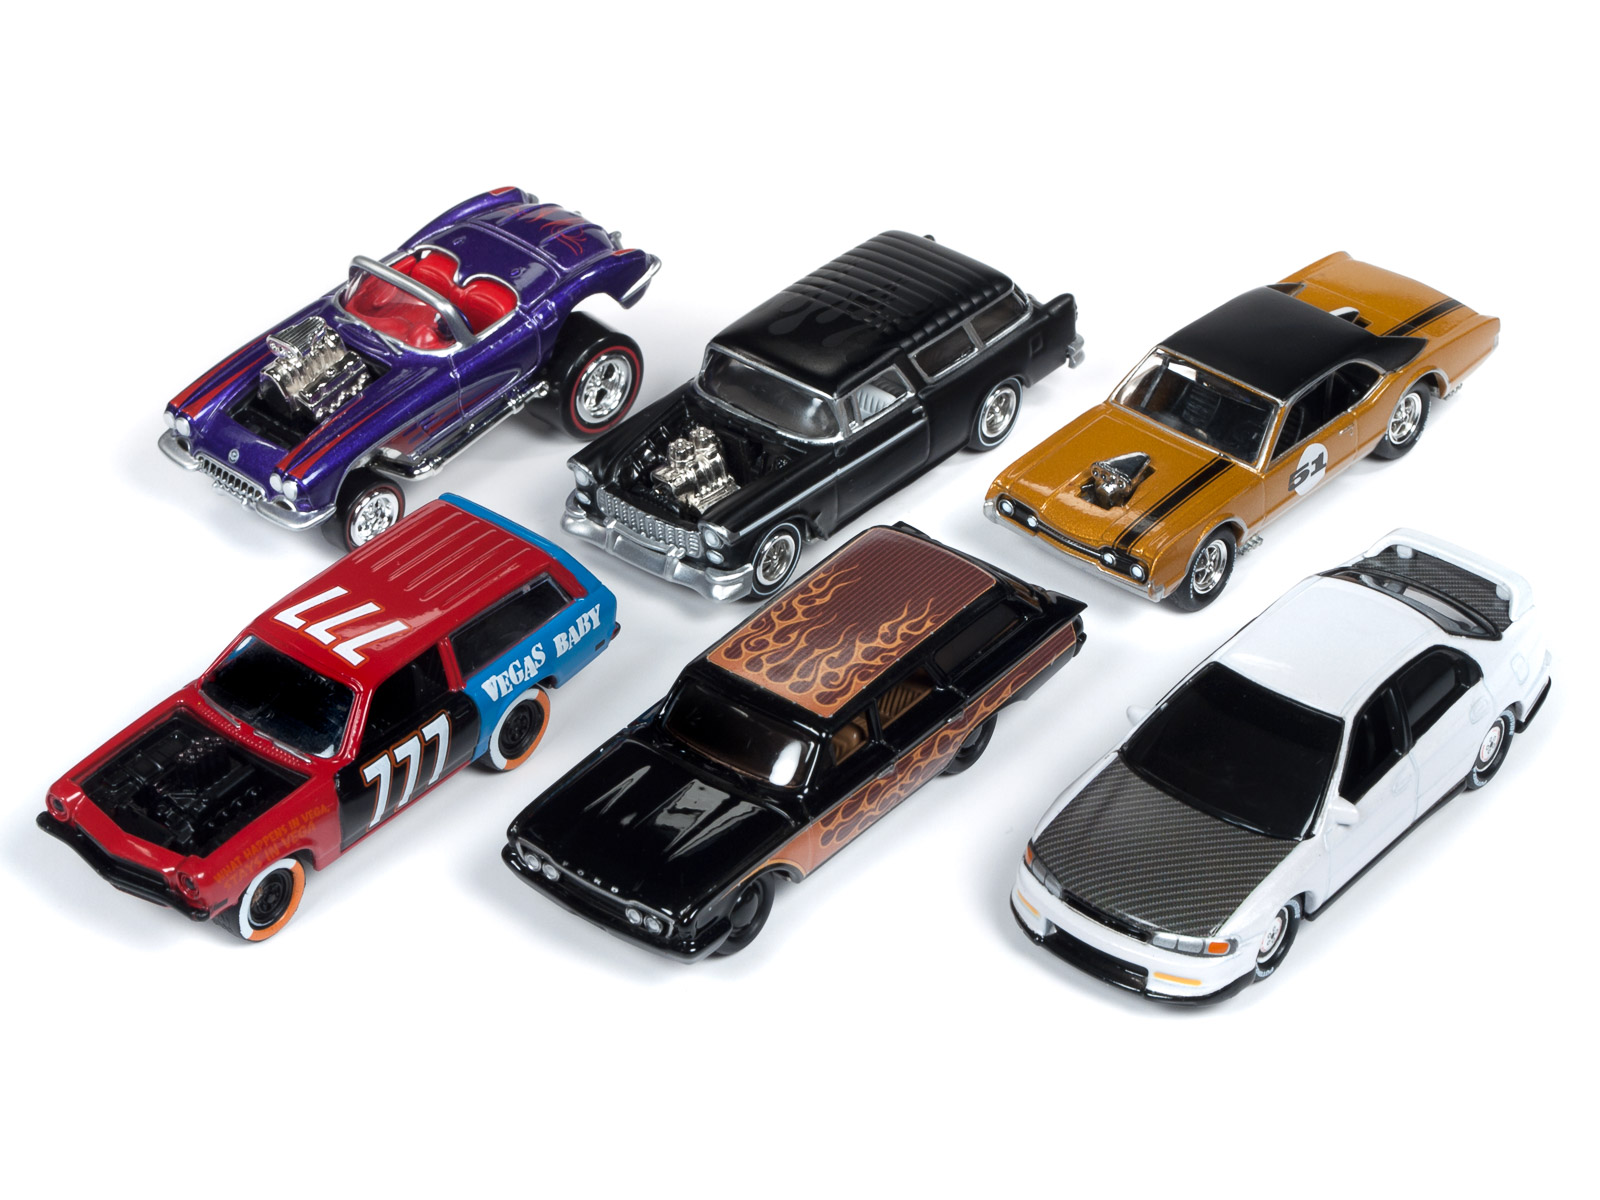 "Street Freaks" 2019 Release 2 Set A of 6 Cars Limited Edition to 3000 pieces Worldwide 1/64 Diecast Models by Johnny Lightning